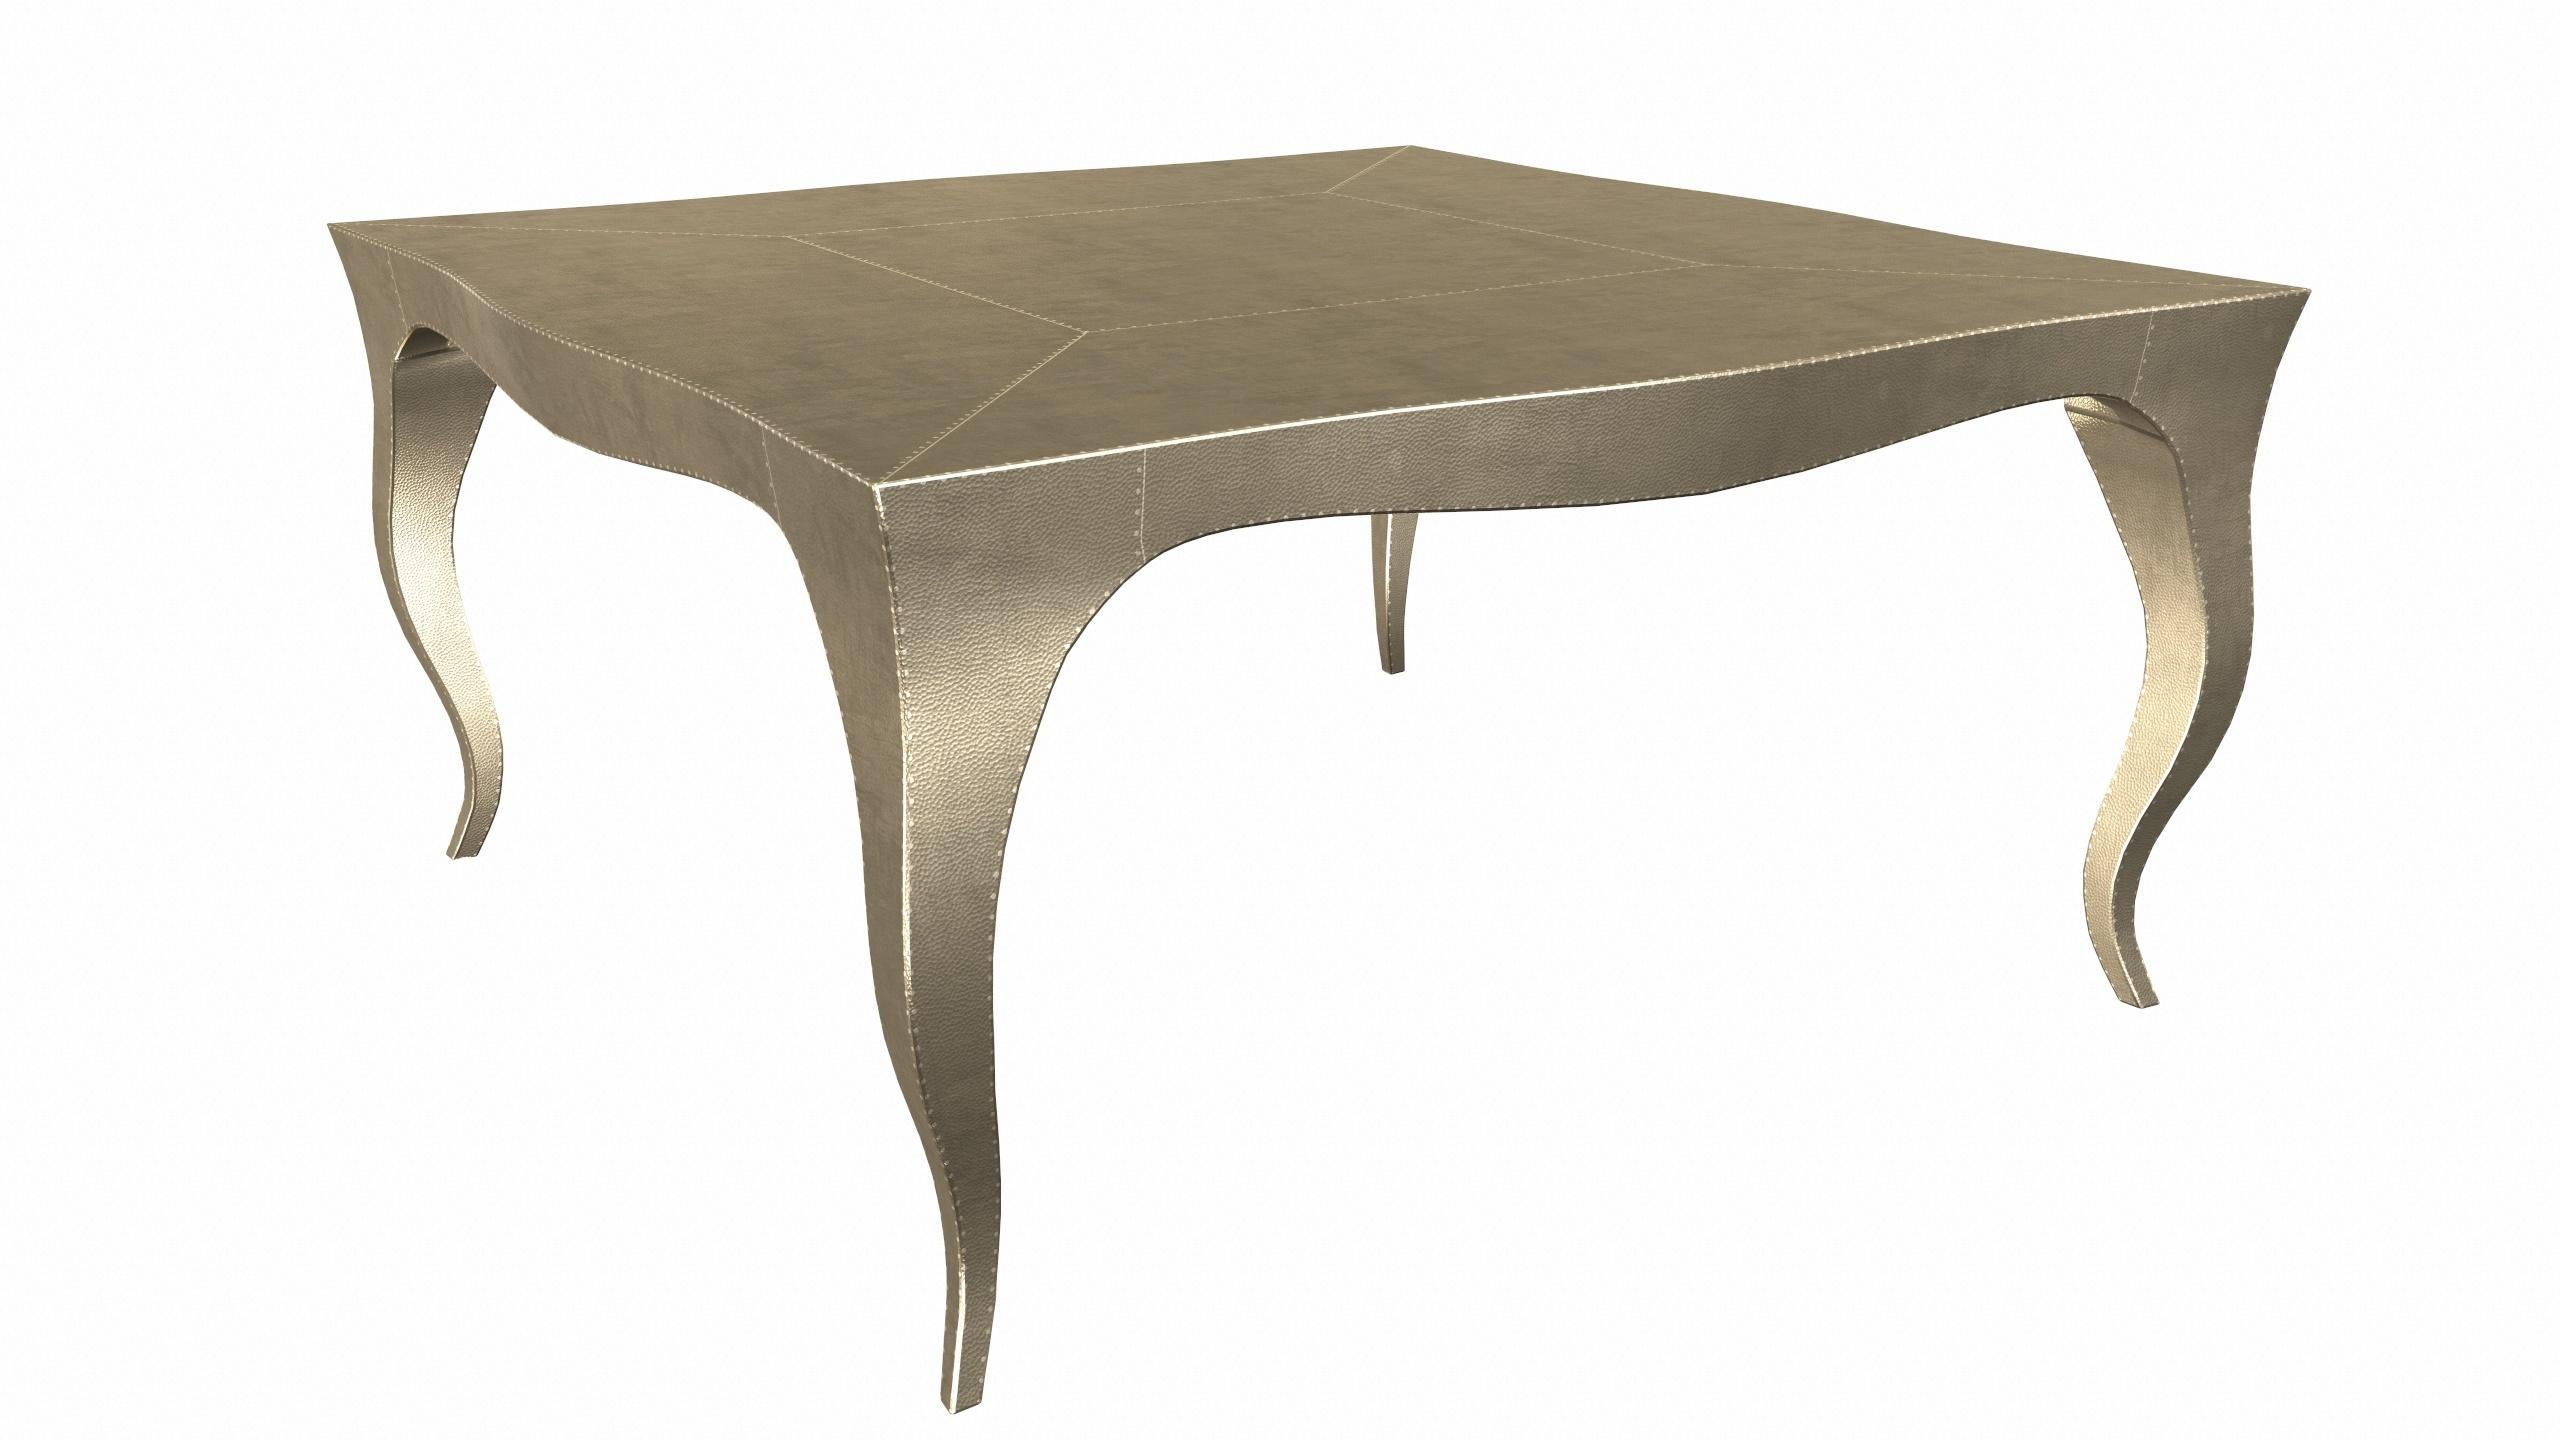 Metal Louise Art Deco Coffee and Cocktail Tables Mid. Hammered Brass by Paul Mathieu For Sale